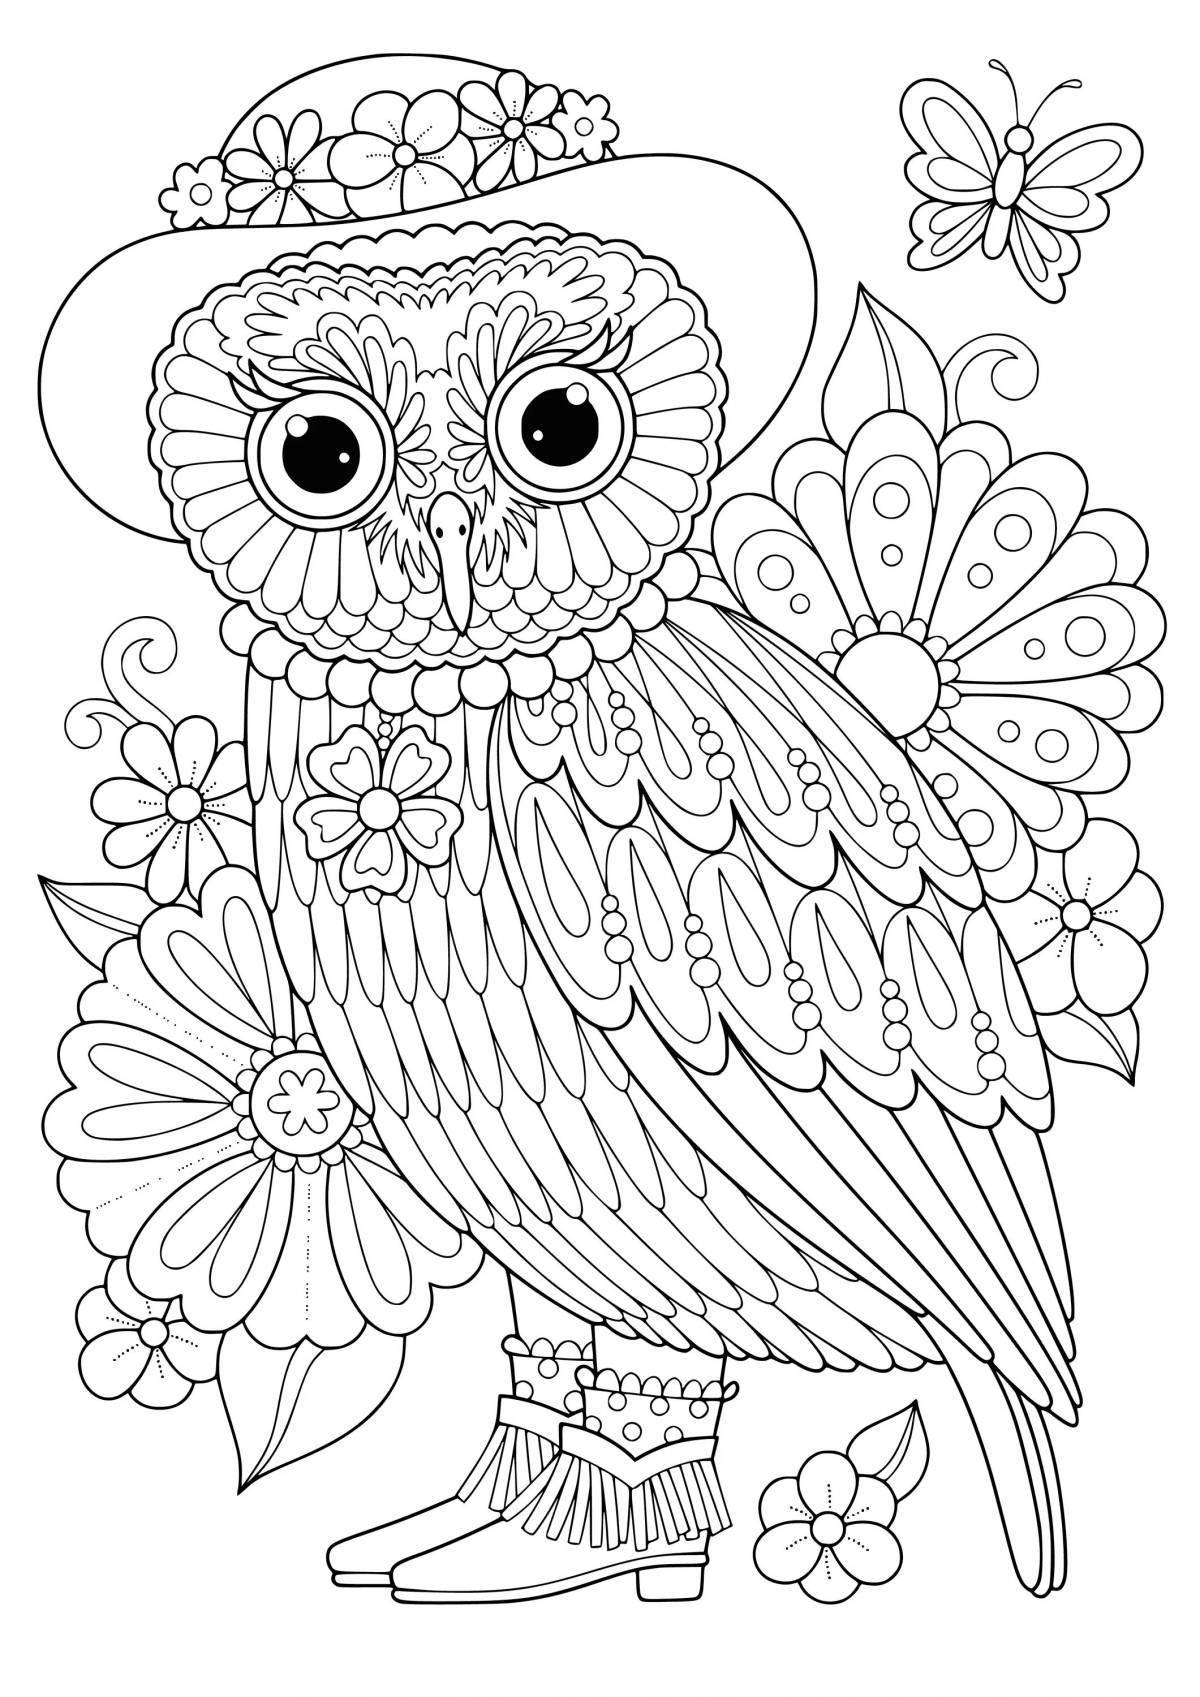 Lovely owl coloring pages